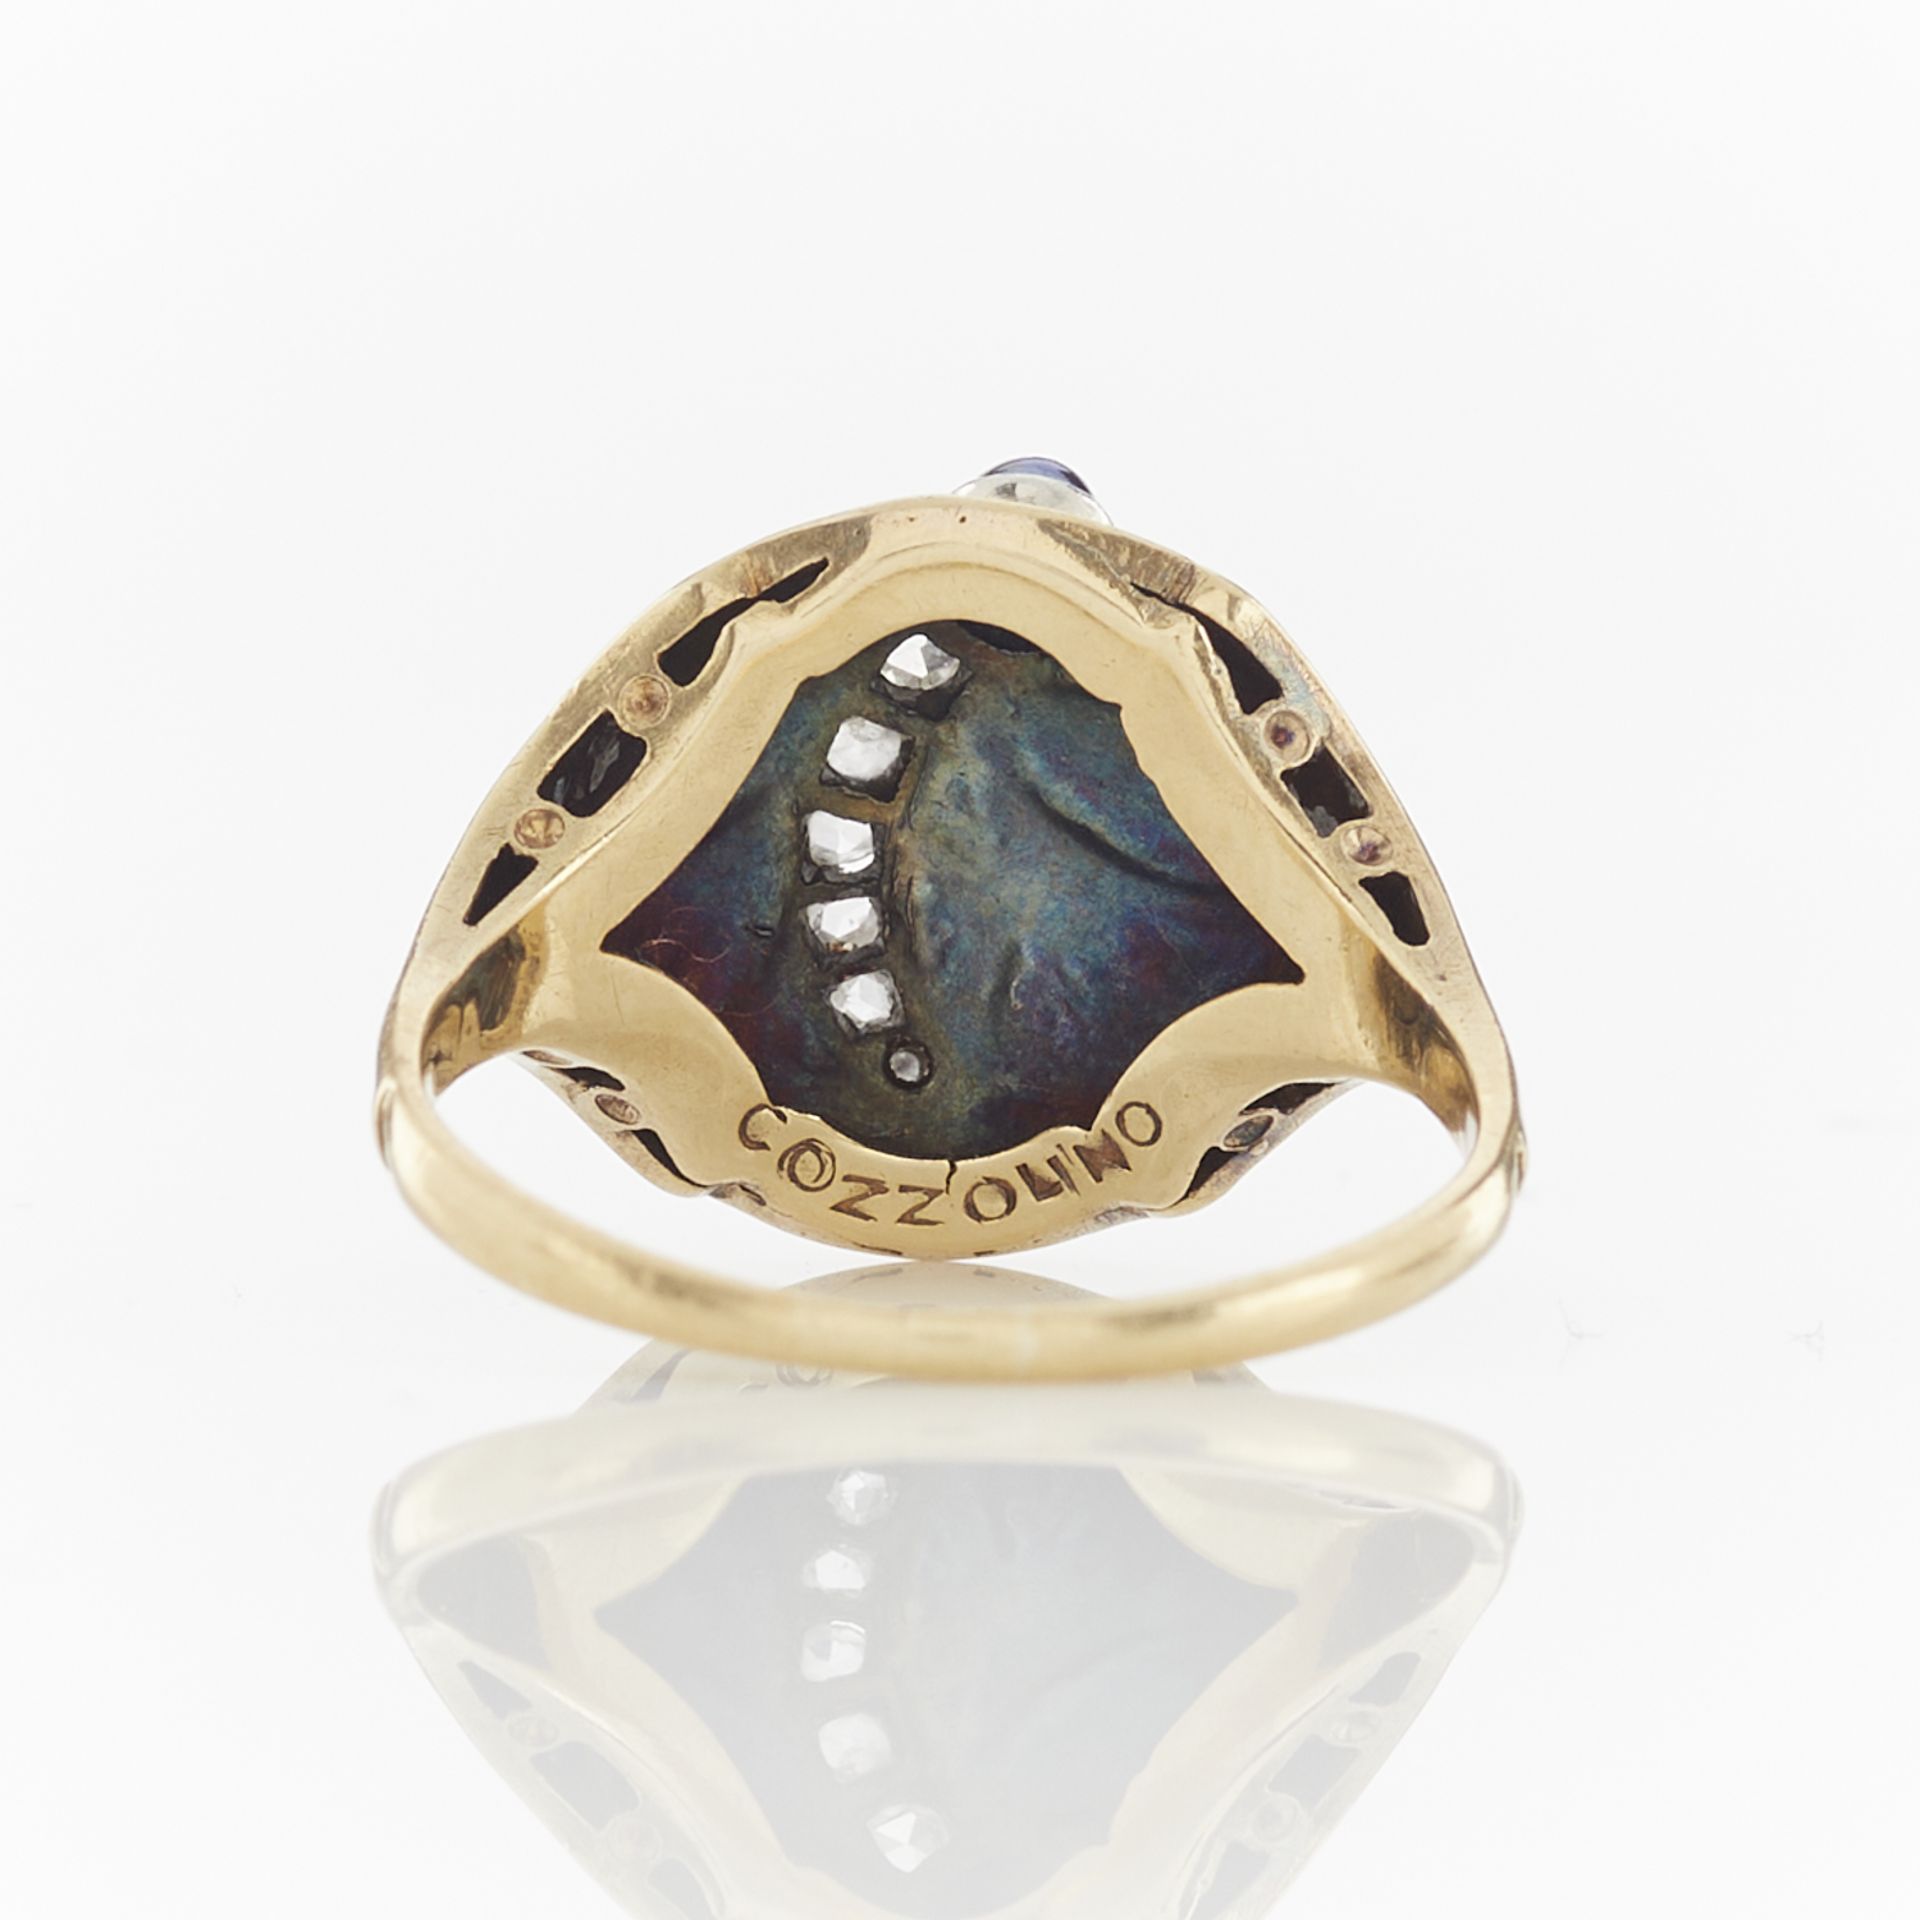 Cozzolino 14k Dragon Fly Ring w/ Dia. & Sapphire - Image 7 of 11